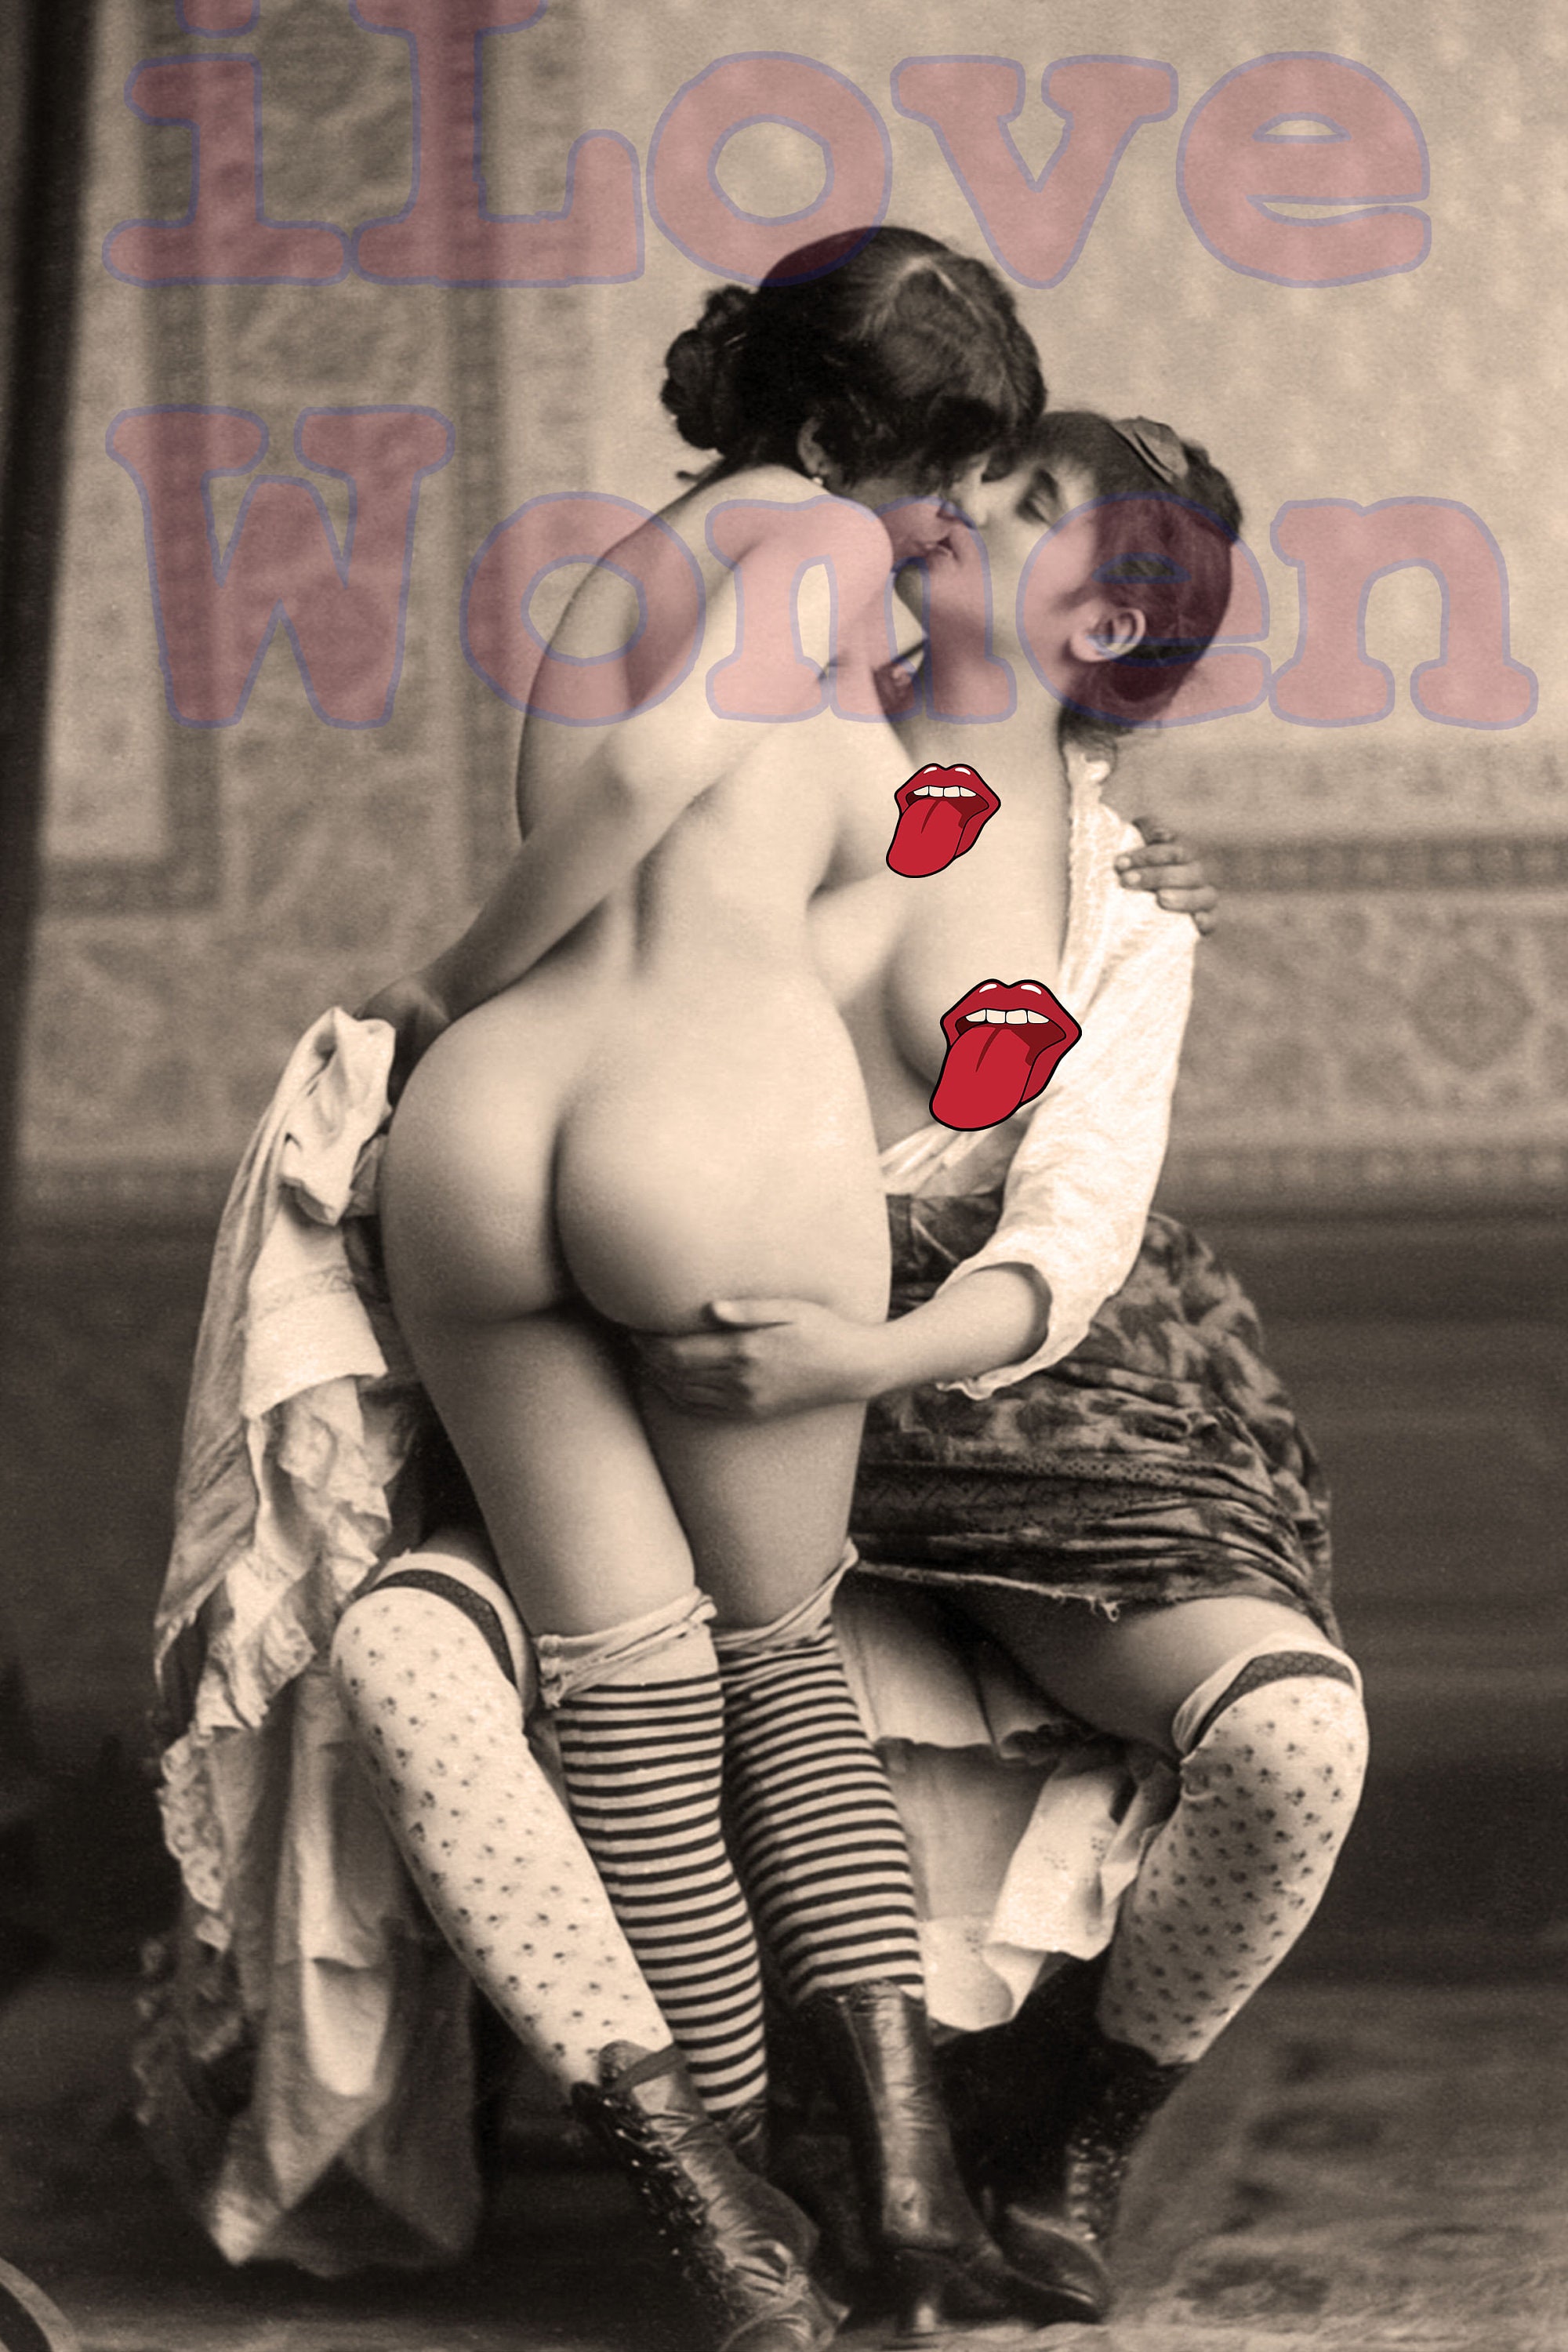 1920's Vintage Nude Photo Sexy Big Booty Lesbian Love - Etsy